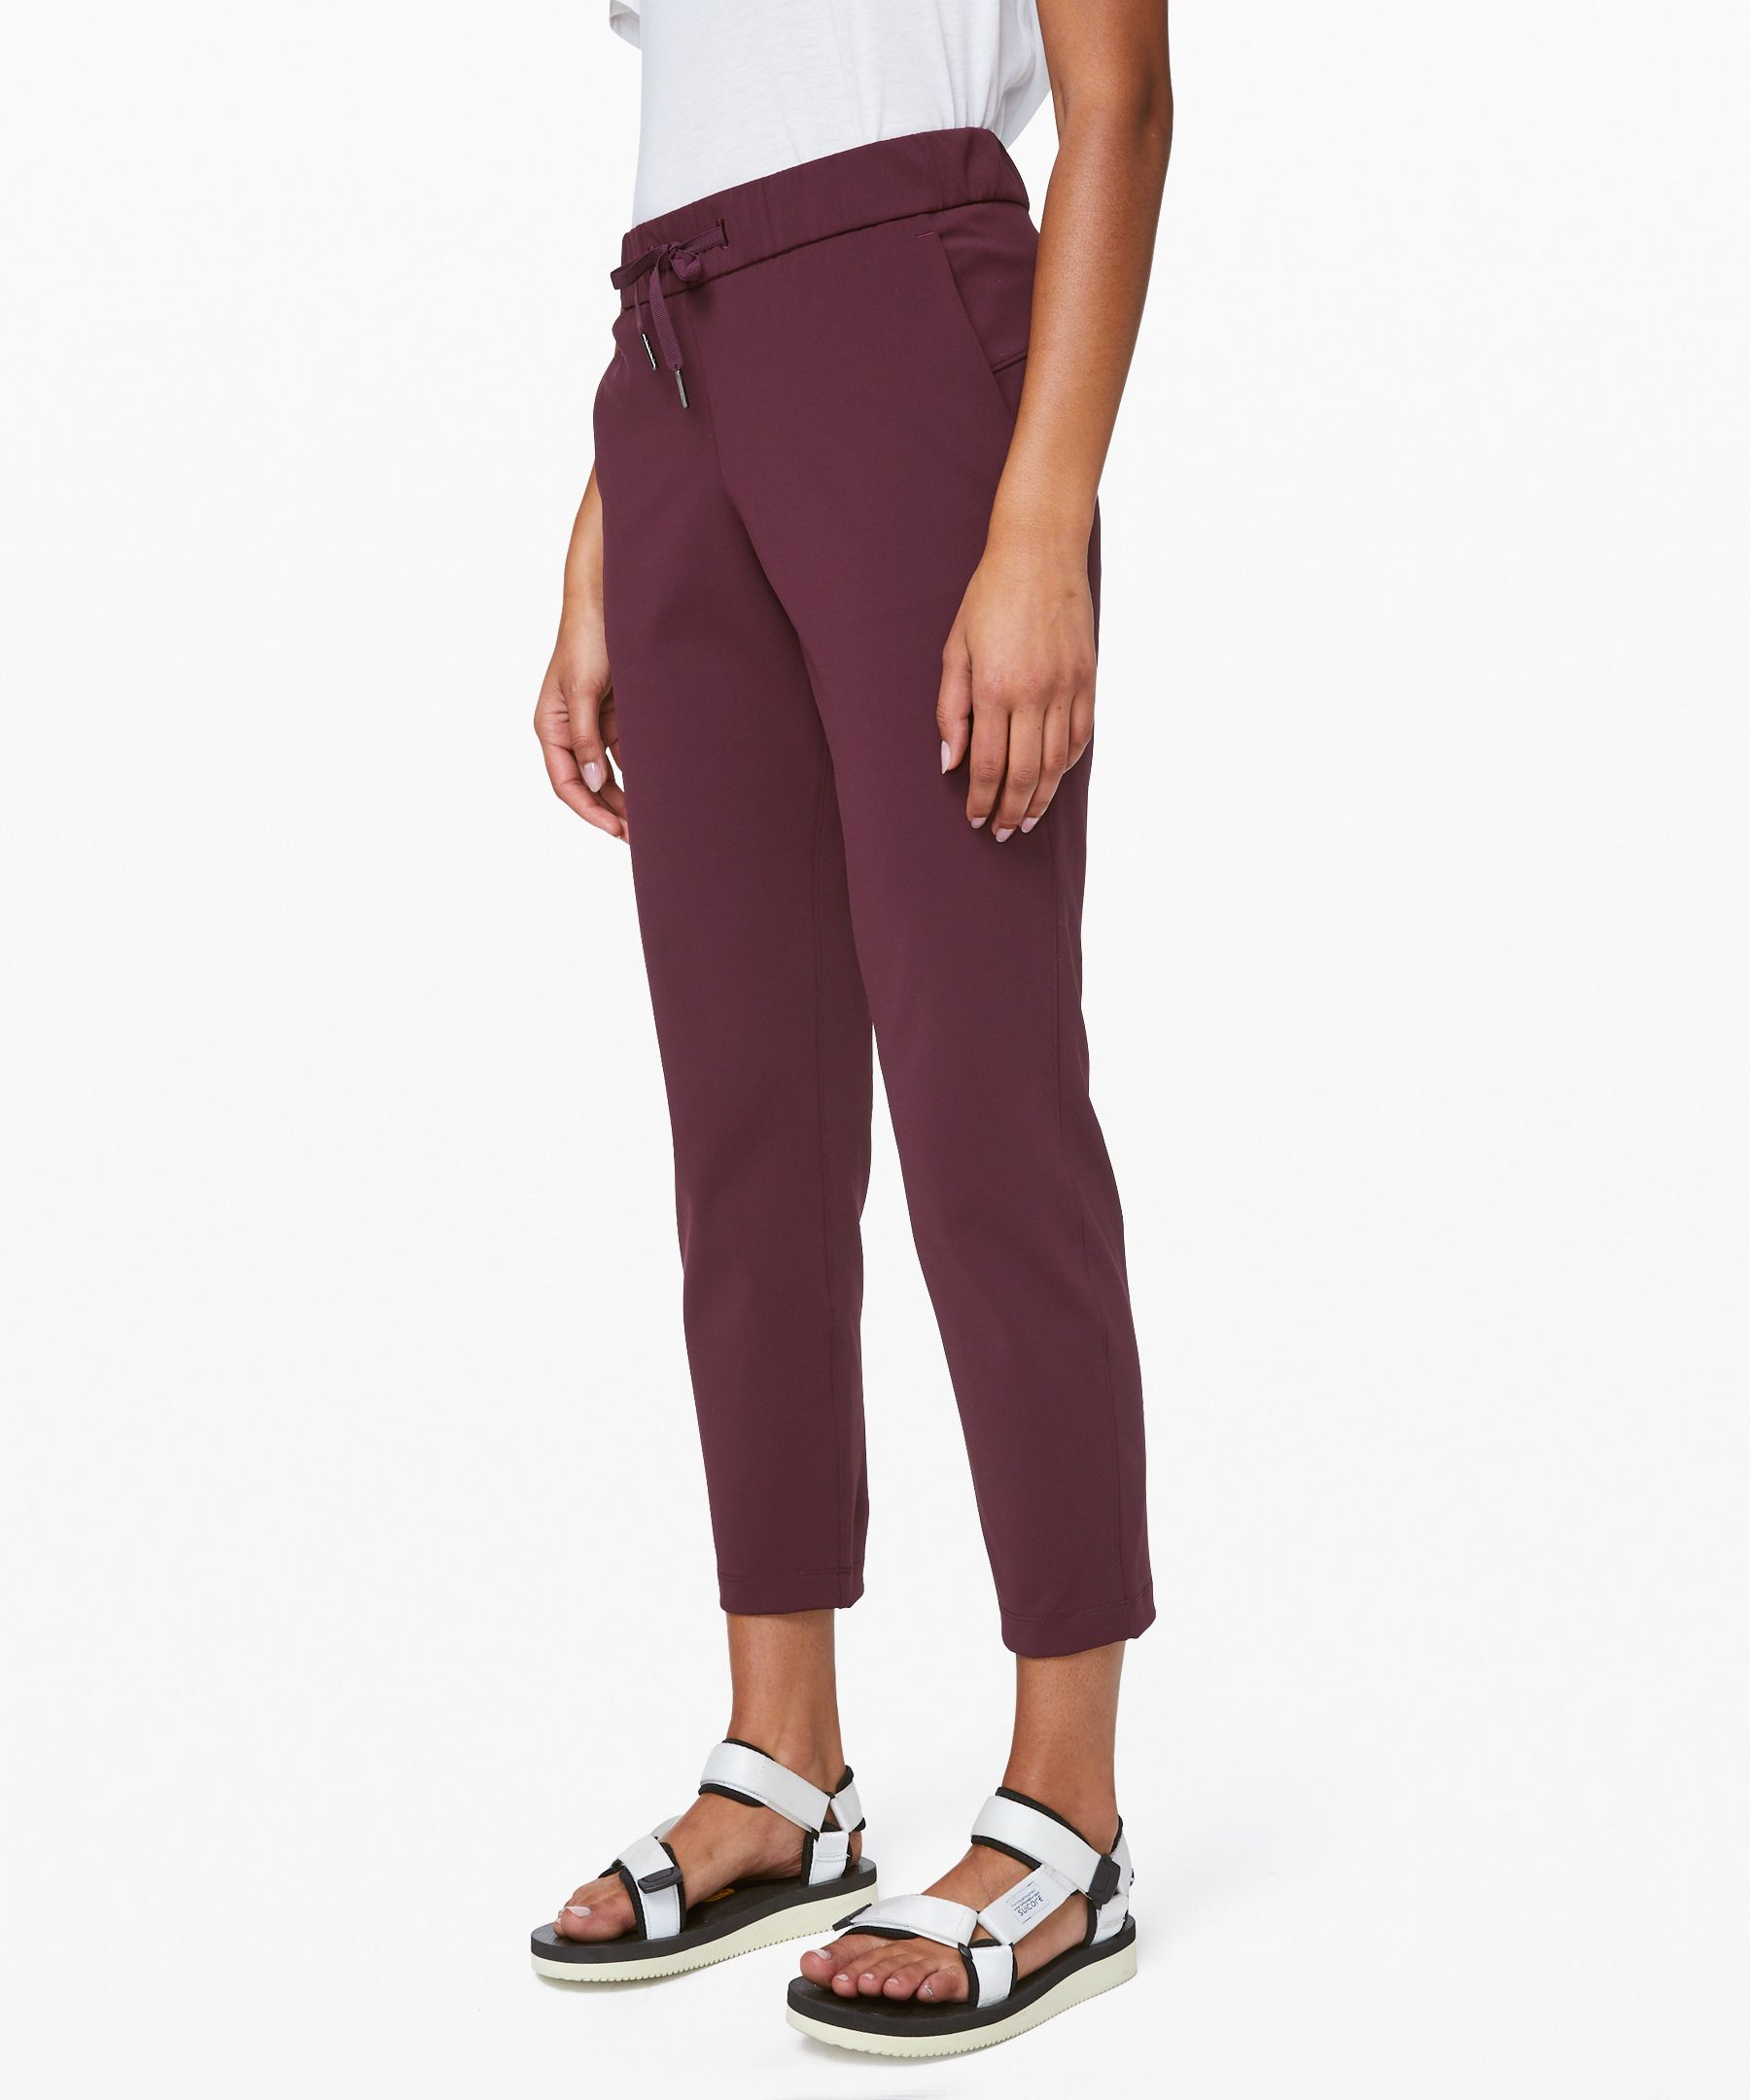 lululemon on the fly pant reviewed